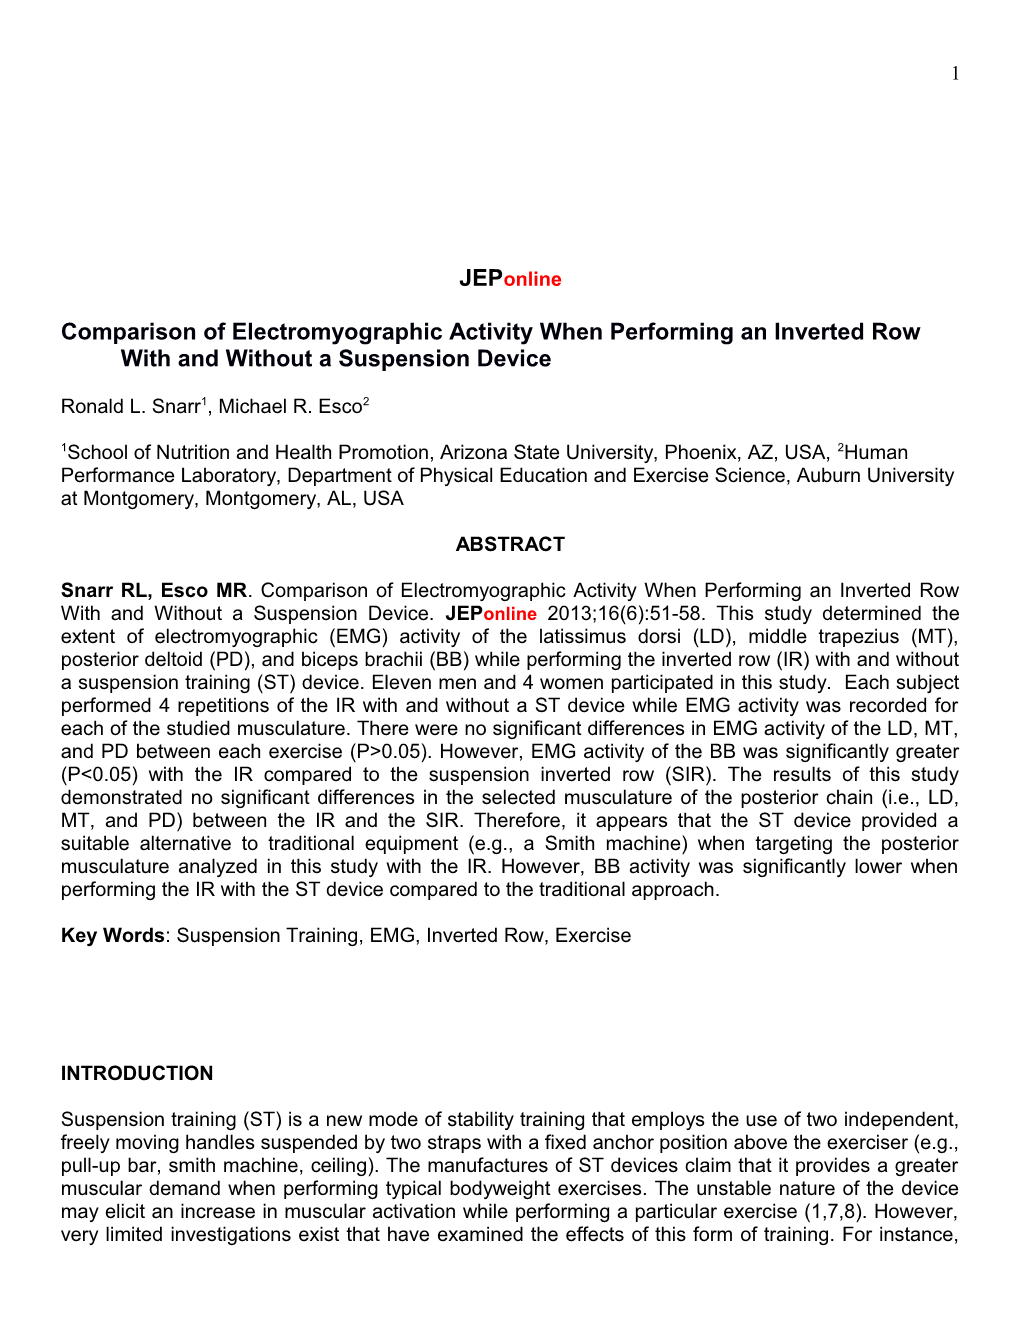 Comparison of Electromyographic Activity When Performing an Inverted Row with and Without